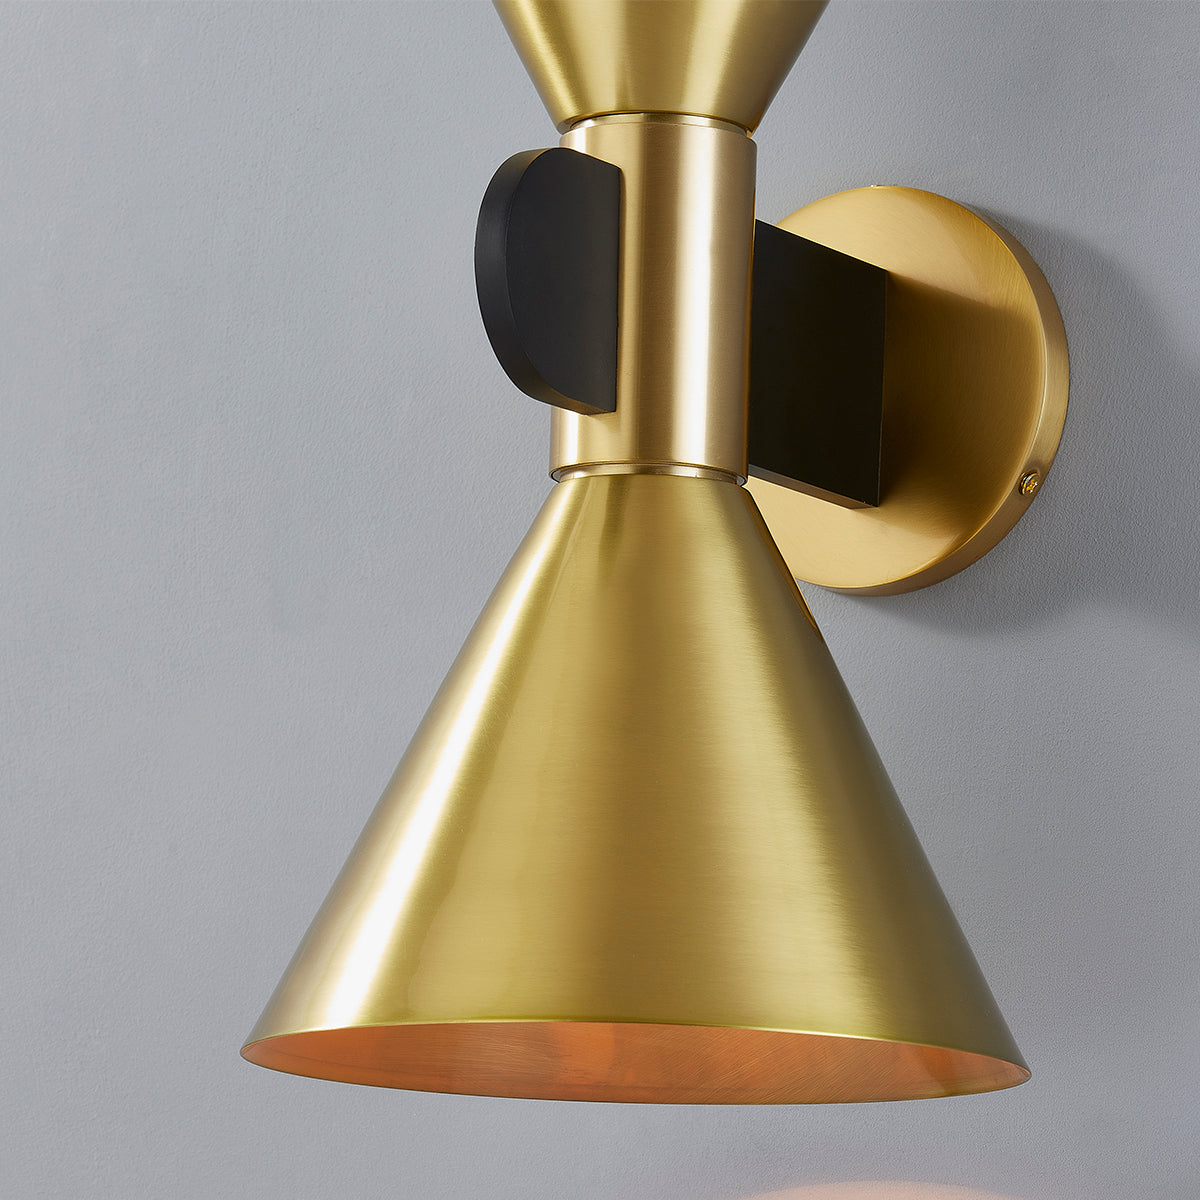 Rounded Black Beam wit Aged Brass Conical Shade 2 Light Wall Sconce